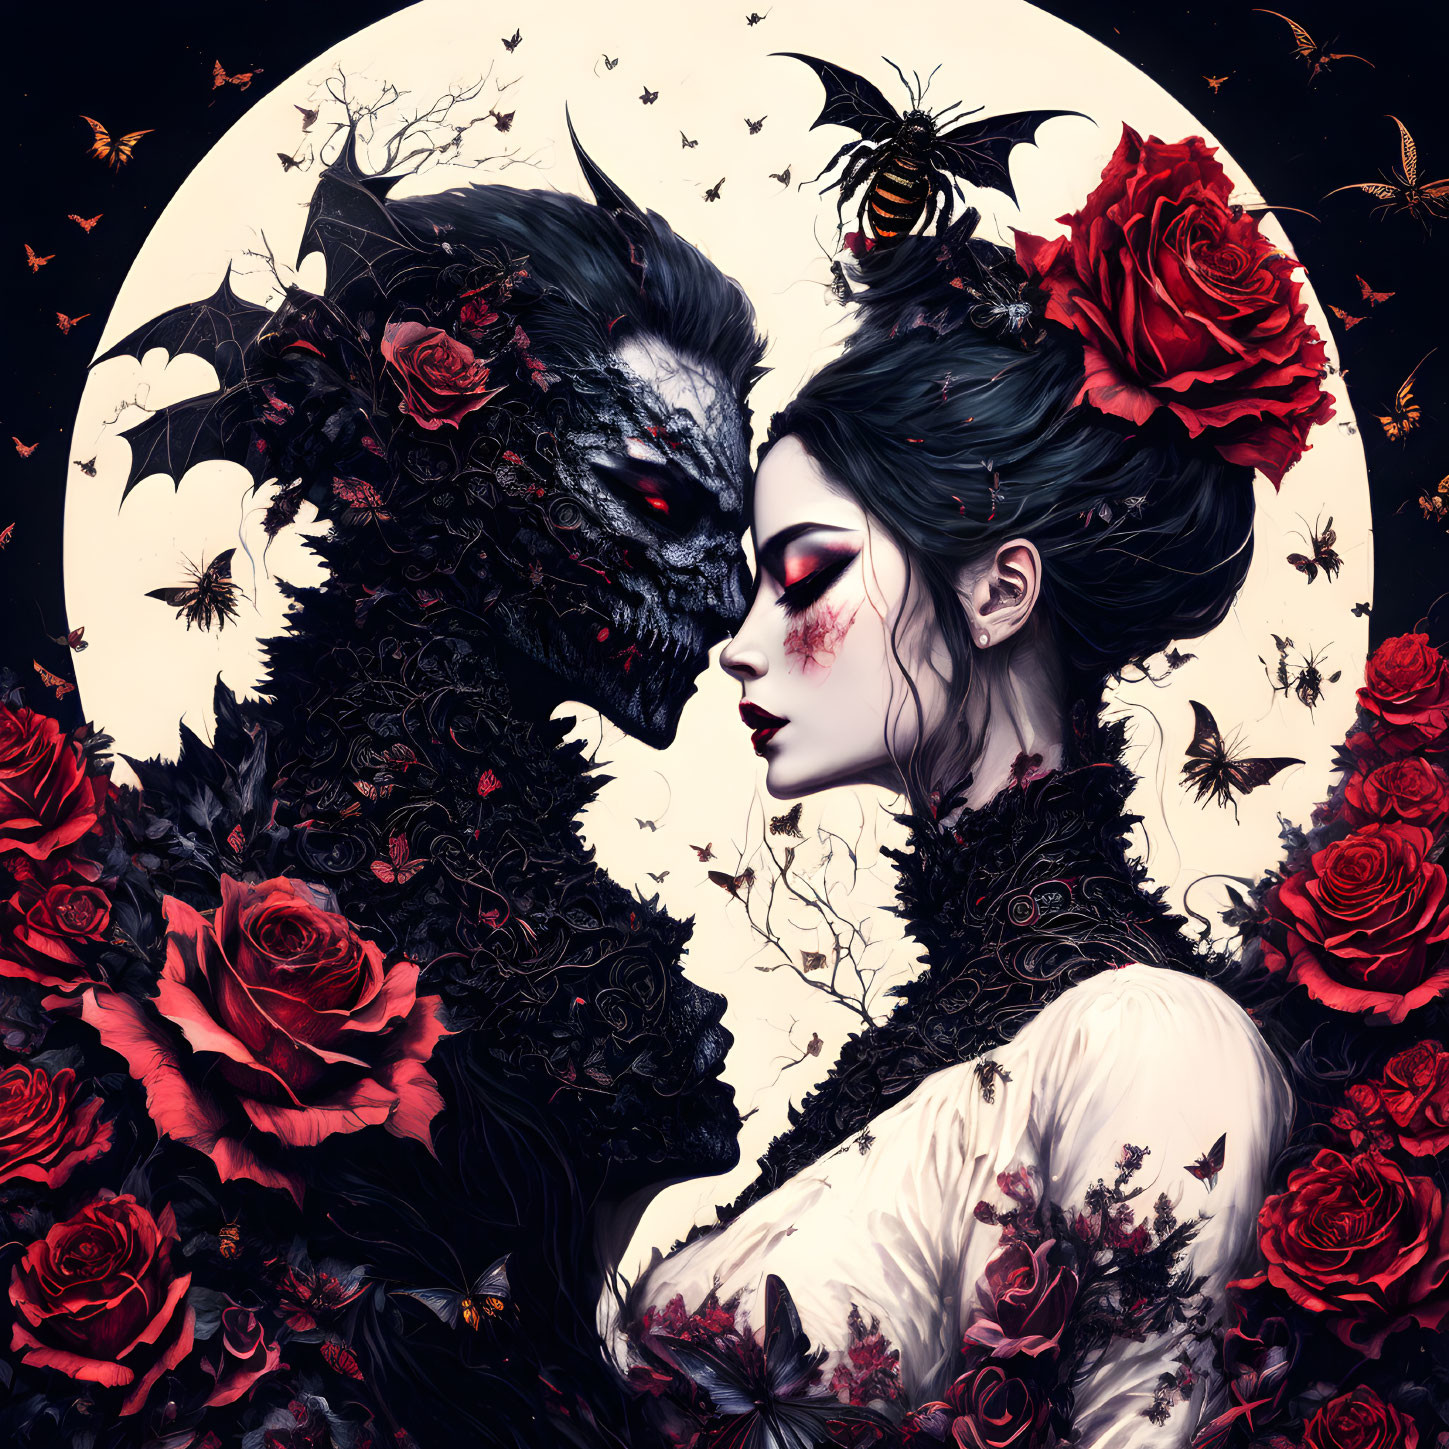 Gothic Artwork: Woman with Intricate Makeup and Wolf-like Creature among Roses and Bats